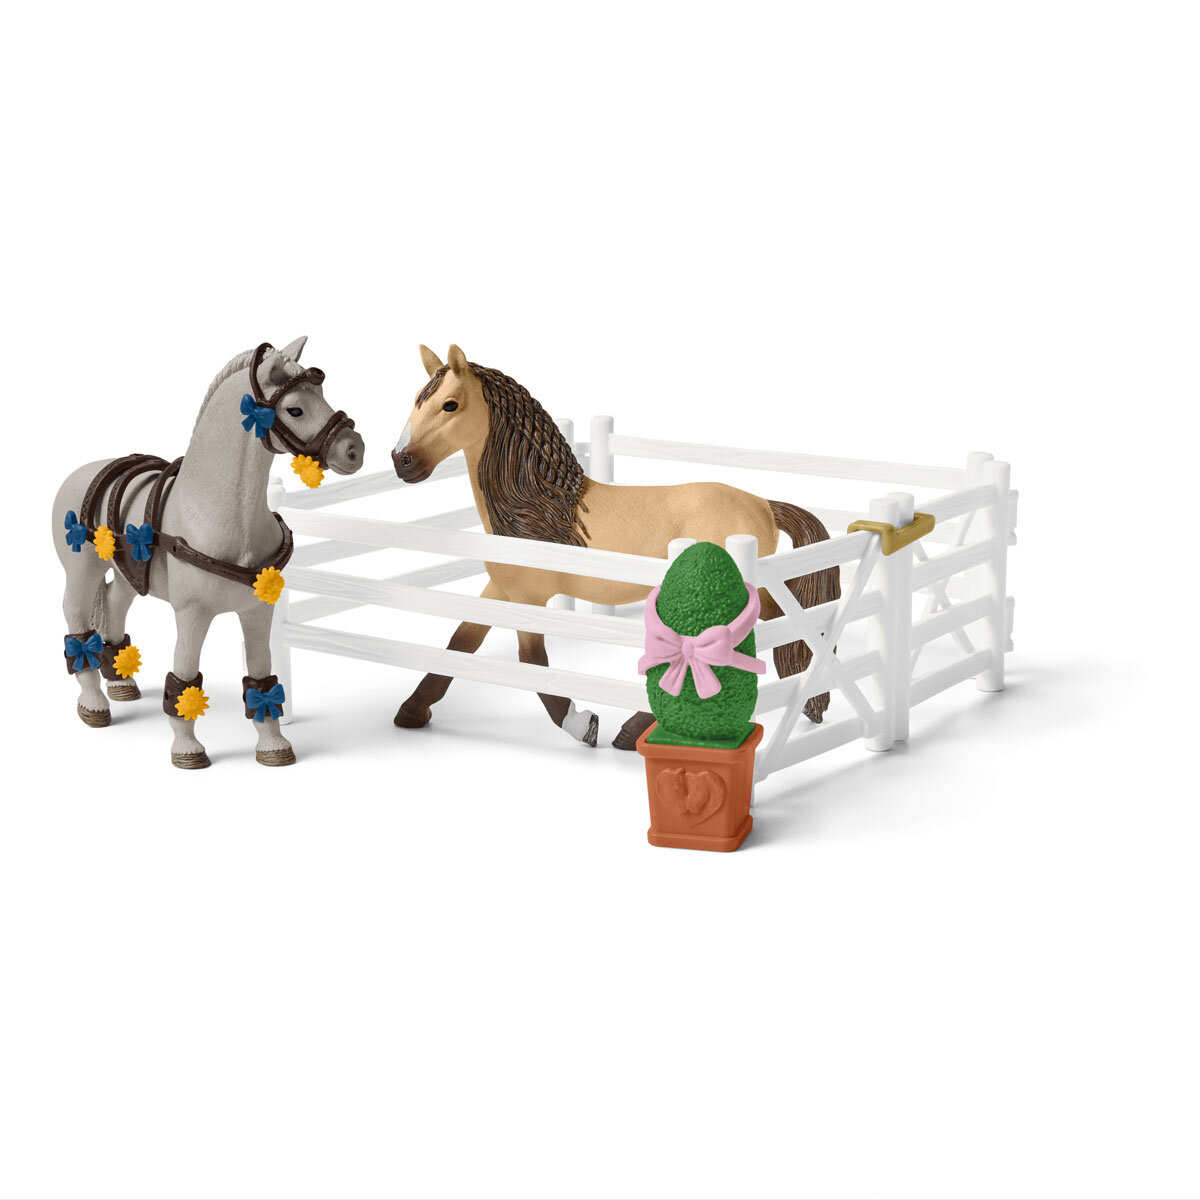 Buy Schleich Big Horse Show Feature3 Image at Costco.co.uk